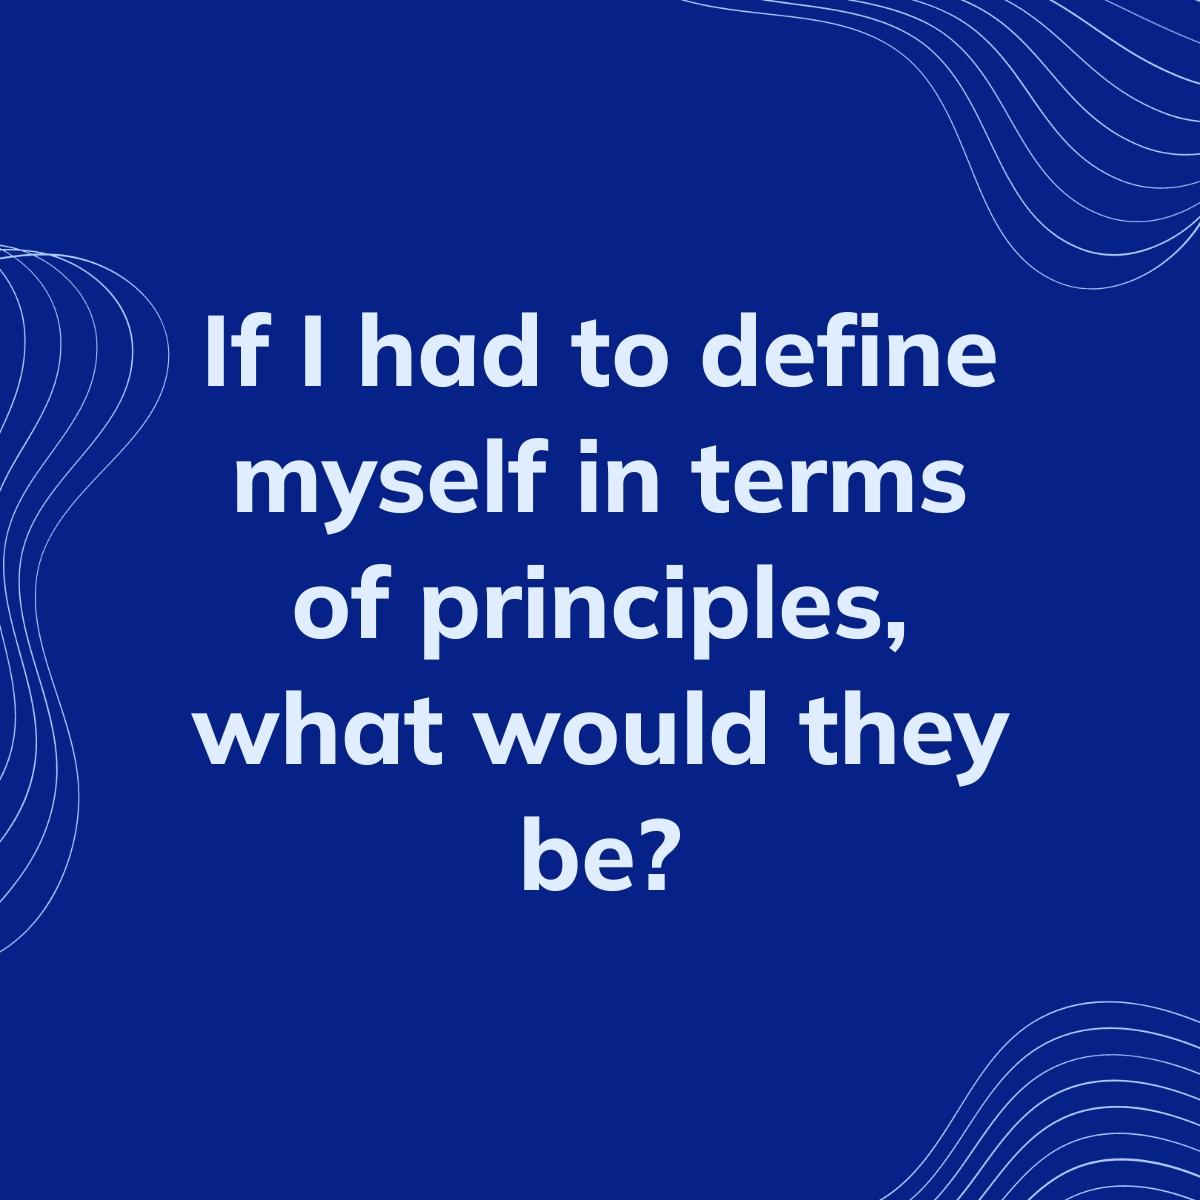 Journal Prompt: If I had to define myself in terms of principles, what would they be?